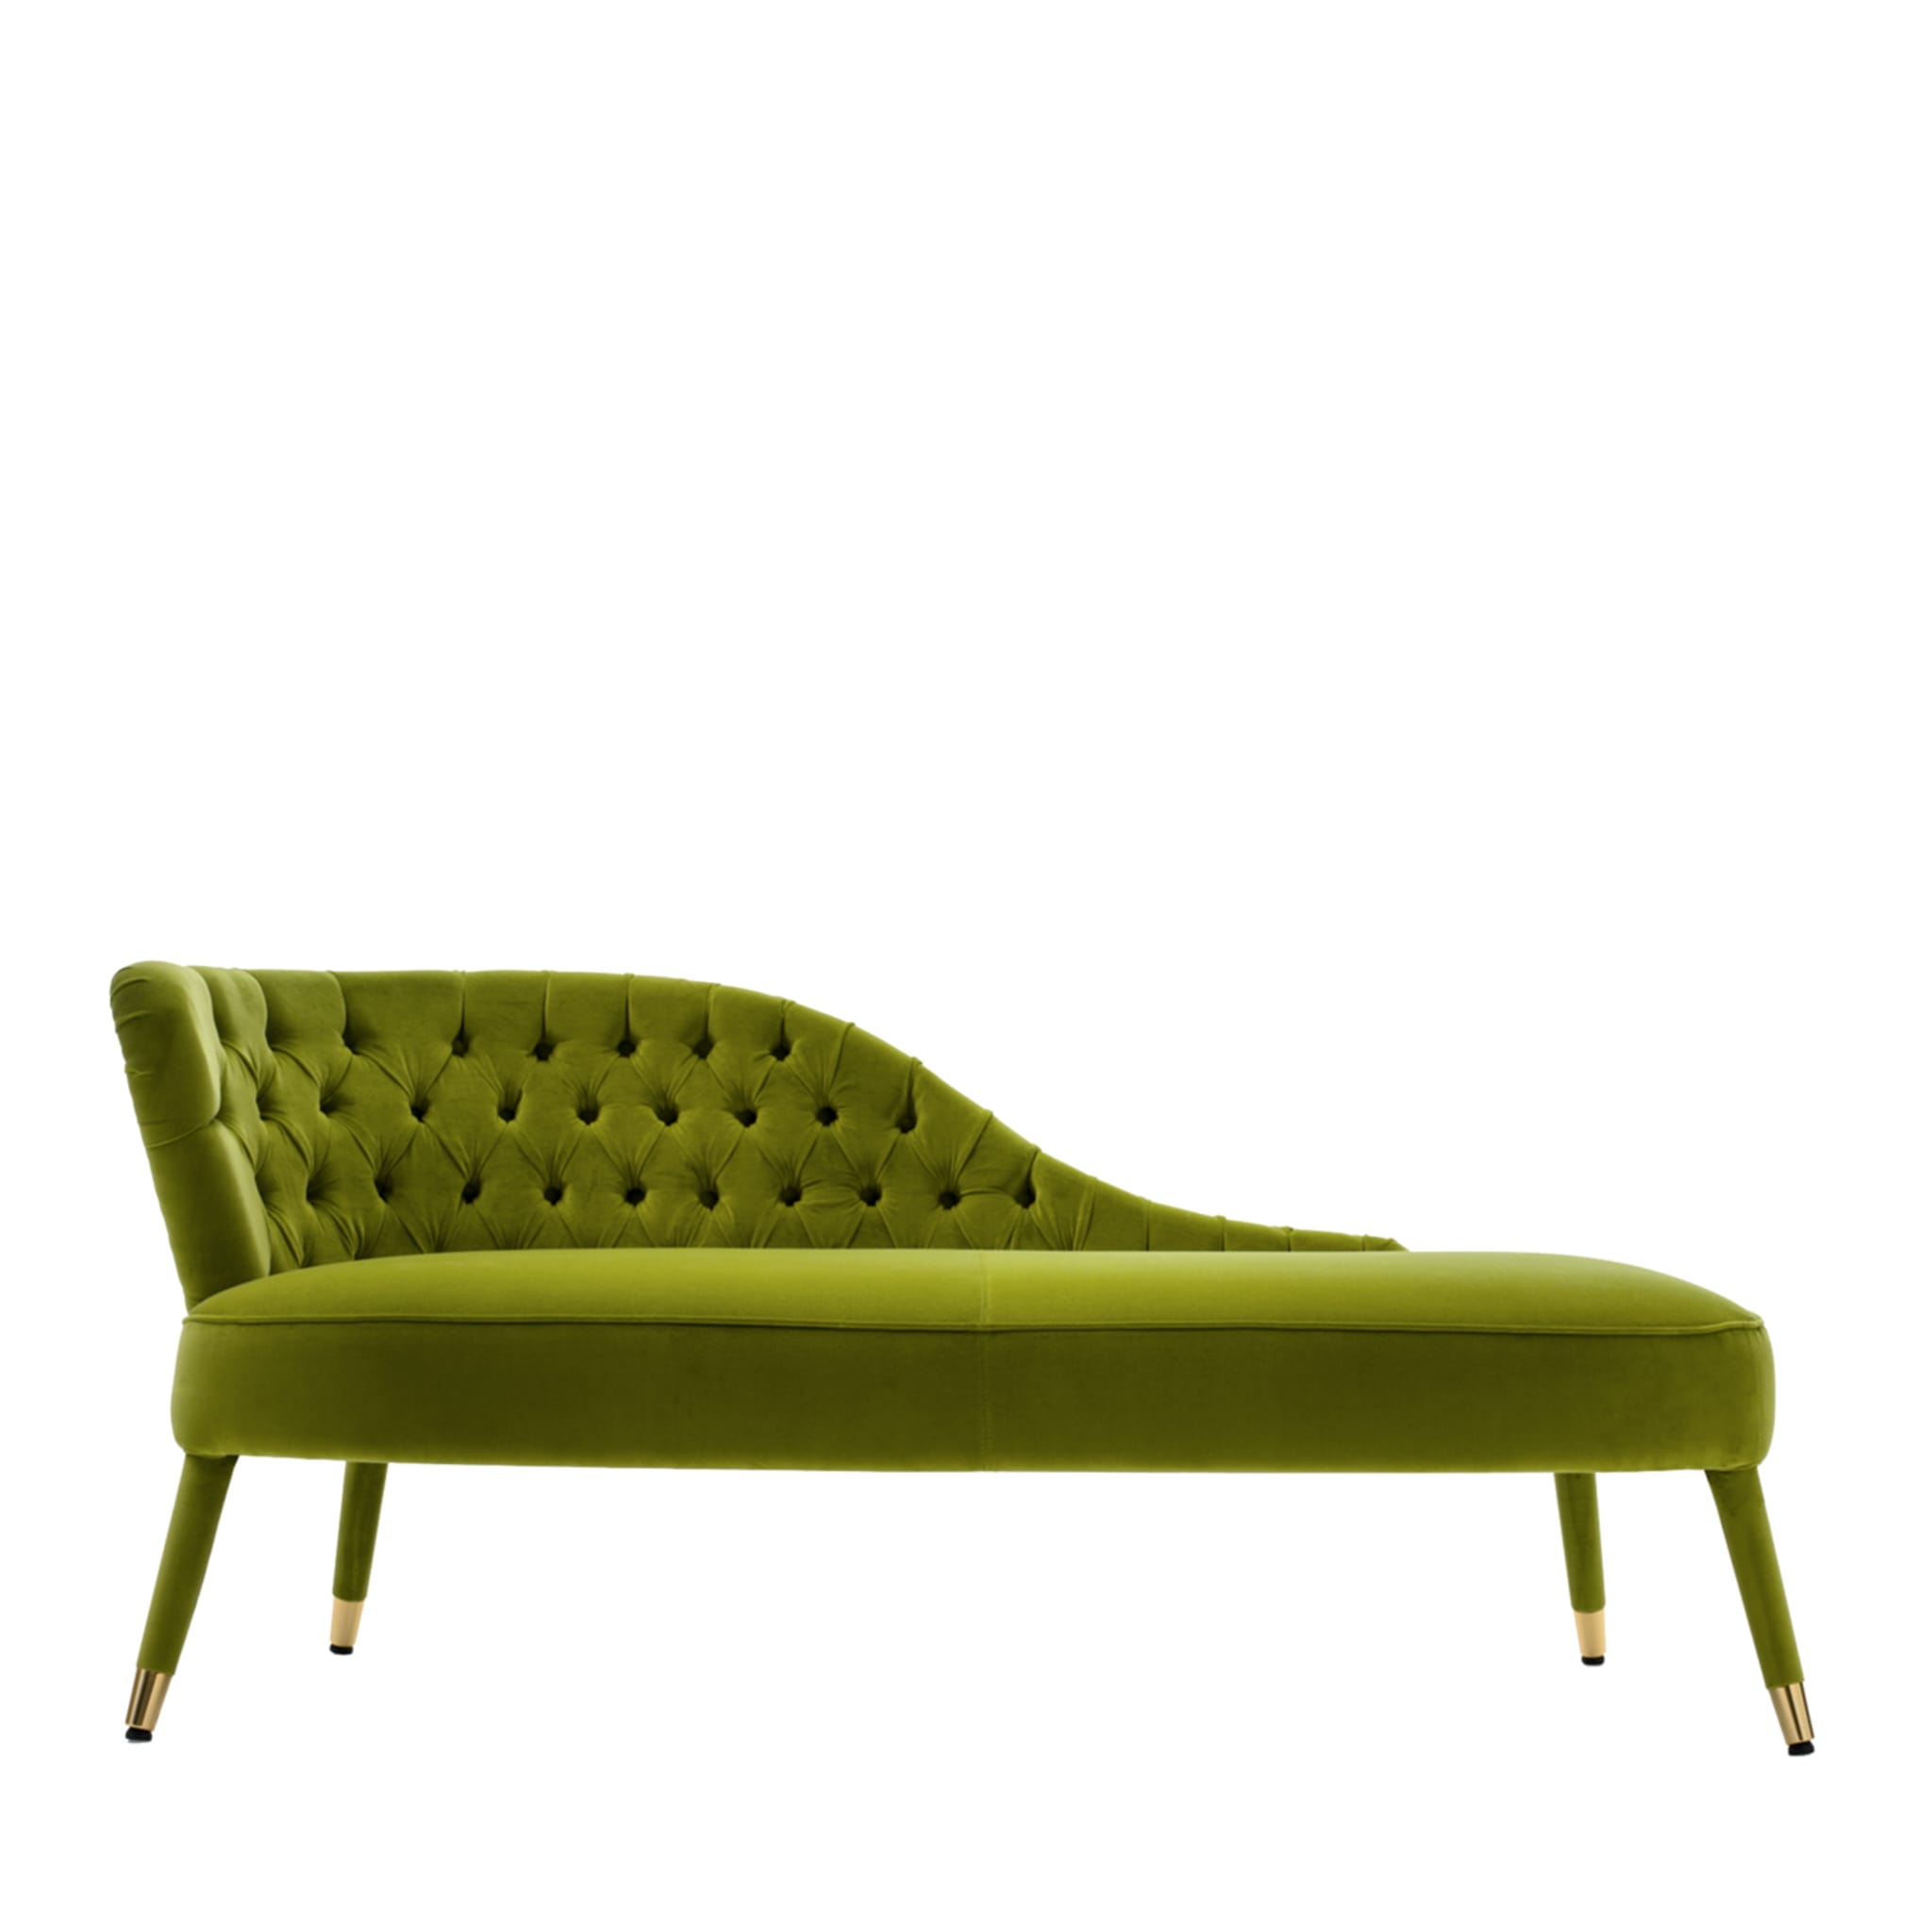 Penelope Green Chaise Longue - Main view